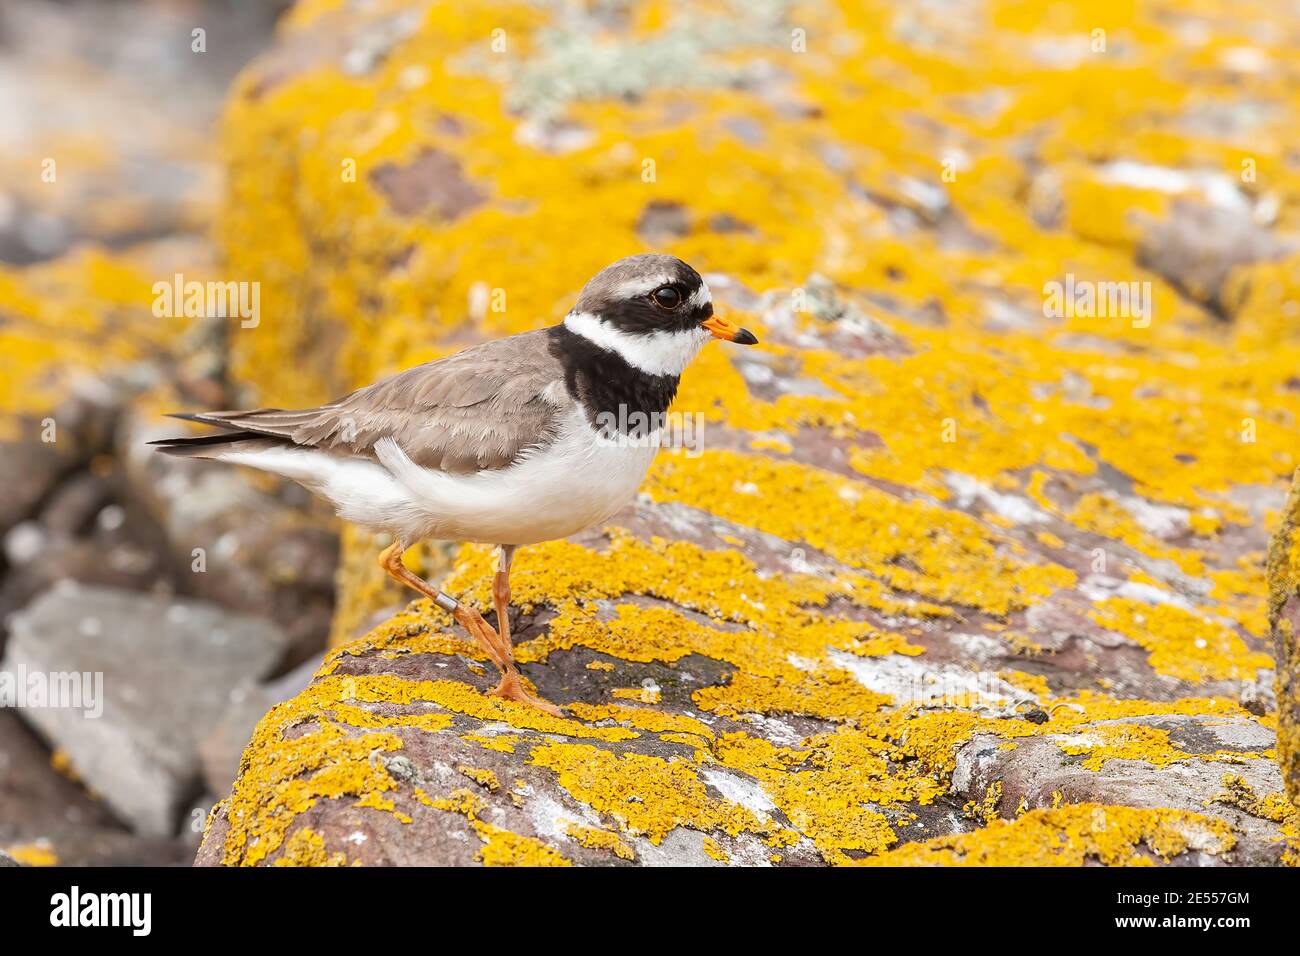 Common Ringed Plover, Charadrius hiaticula, single adult standing on ground among lichen-covered rocks, United Kingdom, 7 June 2008 Stock Photo